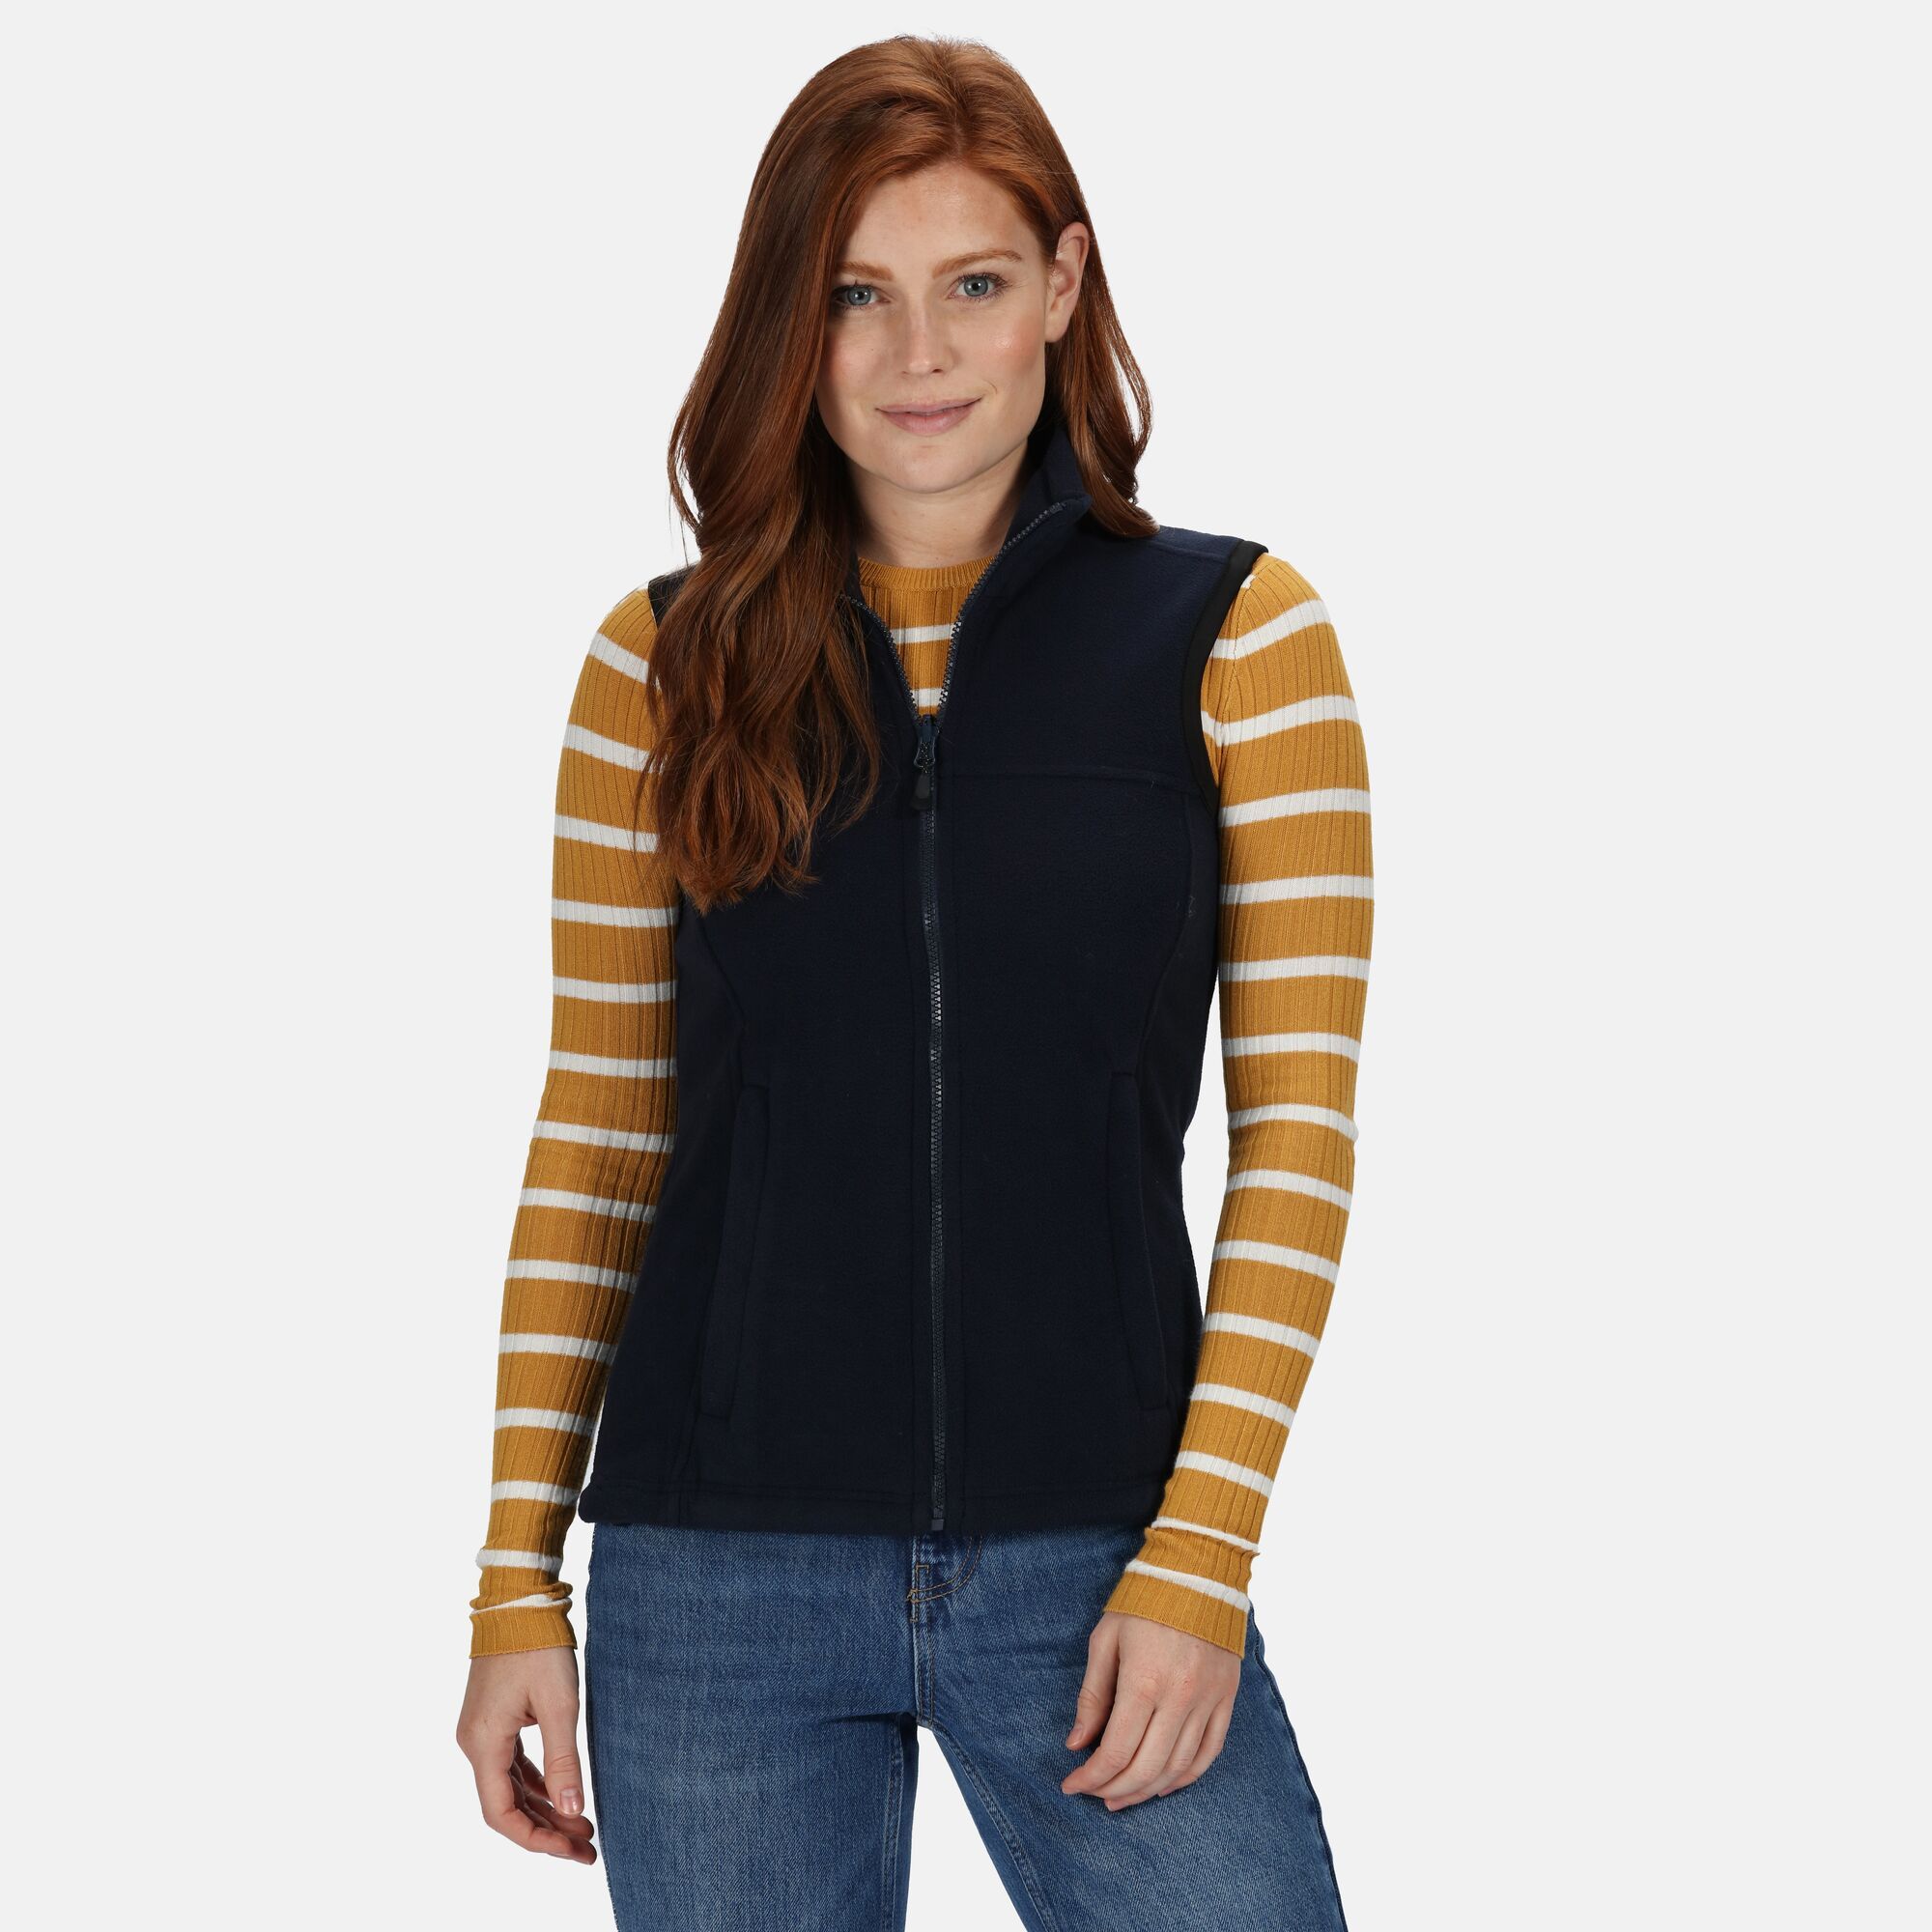 Interactive. Elasticated bound armholes. 2 zipped lower pockets. Adjustable shockcord hem. Shaped fit. Size 10, 12, 14, 16, 18, 20. Fabric 250 series anti-pill Symmetry fleece. Regatta Womens sizing (bust approx): 6 (30in/76cm), 8 (32in/81cm), 10 (34in/86cm), 12 (36in/92cm), 14 (38in/97cm), 16 (40in/102cm), 18 (43in/109cm), 20 (45in/114cm), 22 (48in/122cm), 24 (50in/127cm), 26 (52in/132cm), 28 (54in/137cm), 30 (56in/142cm), 32 (58in/147cm), 34 (60in/152cm), 36 (62in/158cm). 100% polyester.